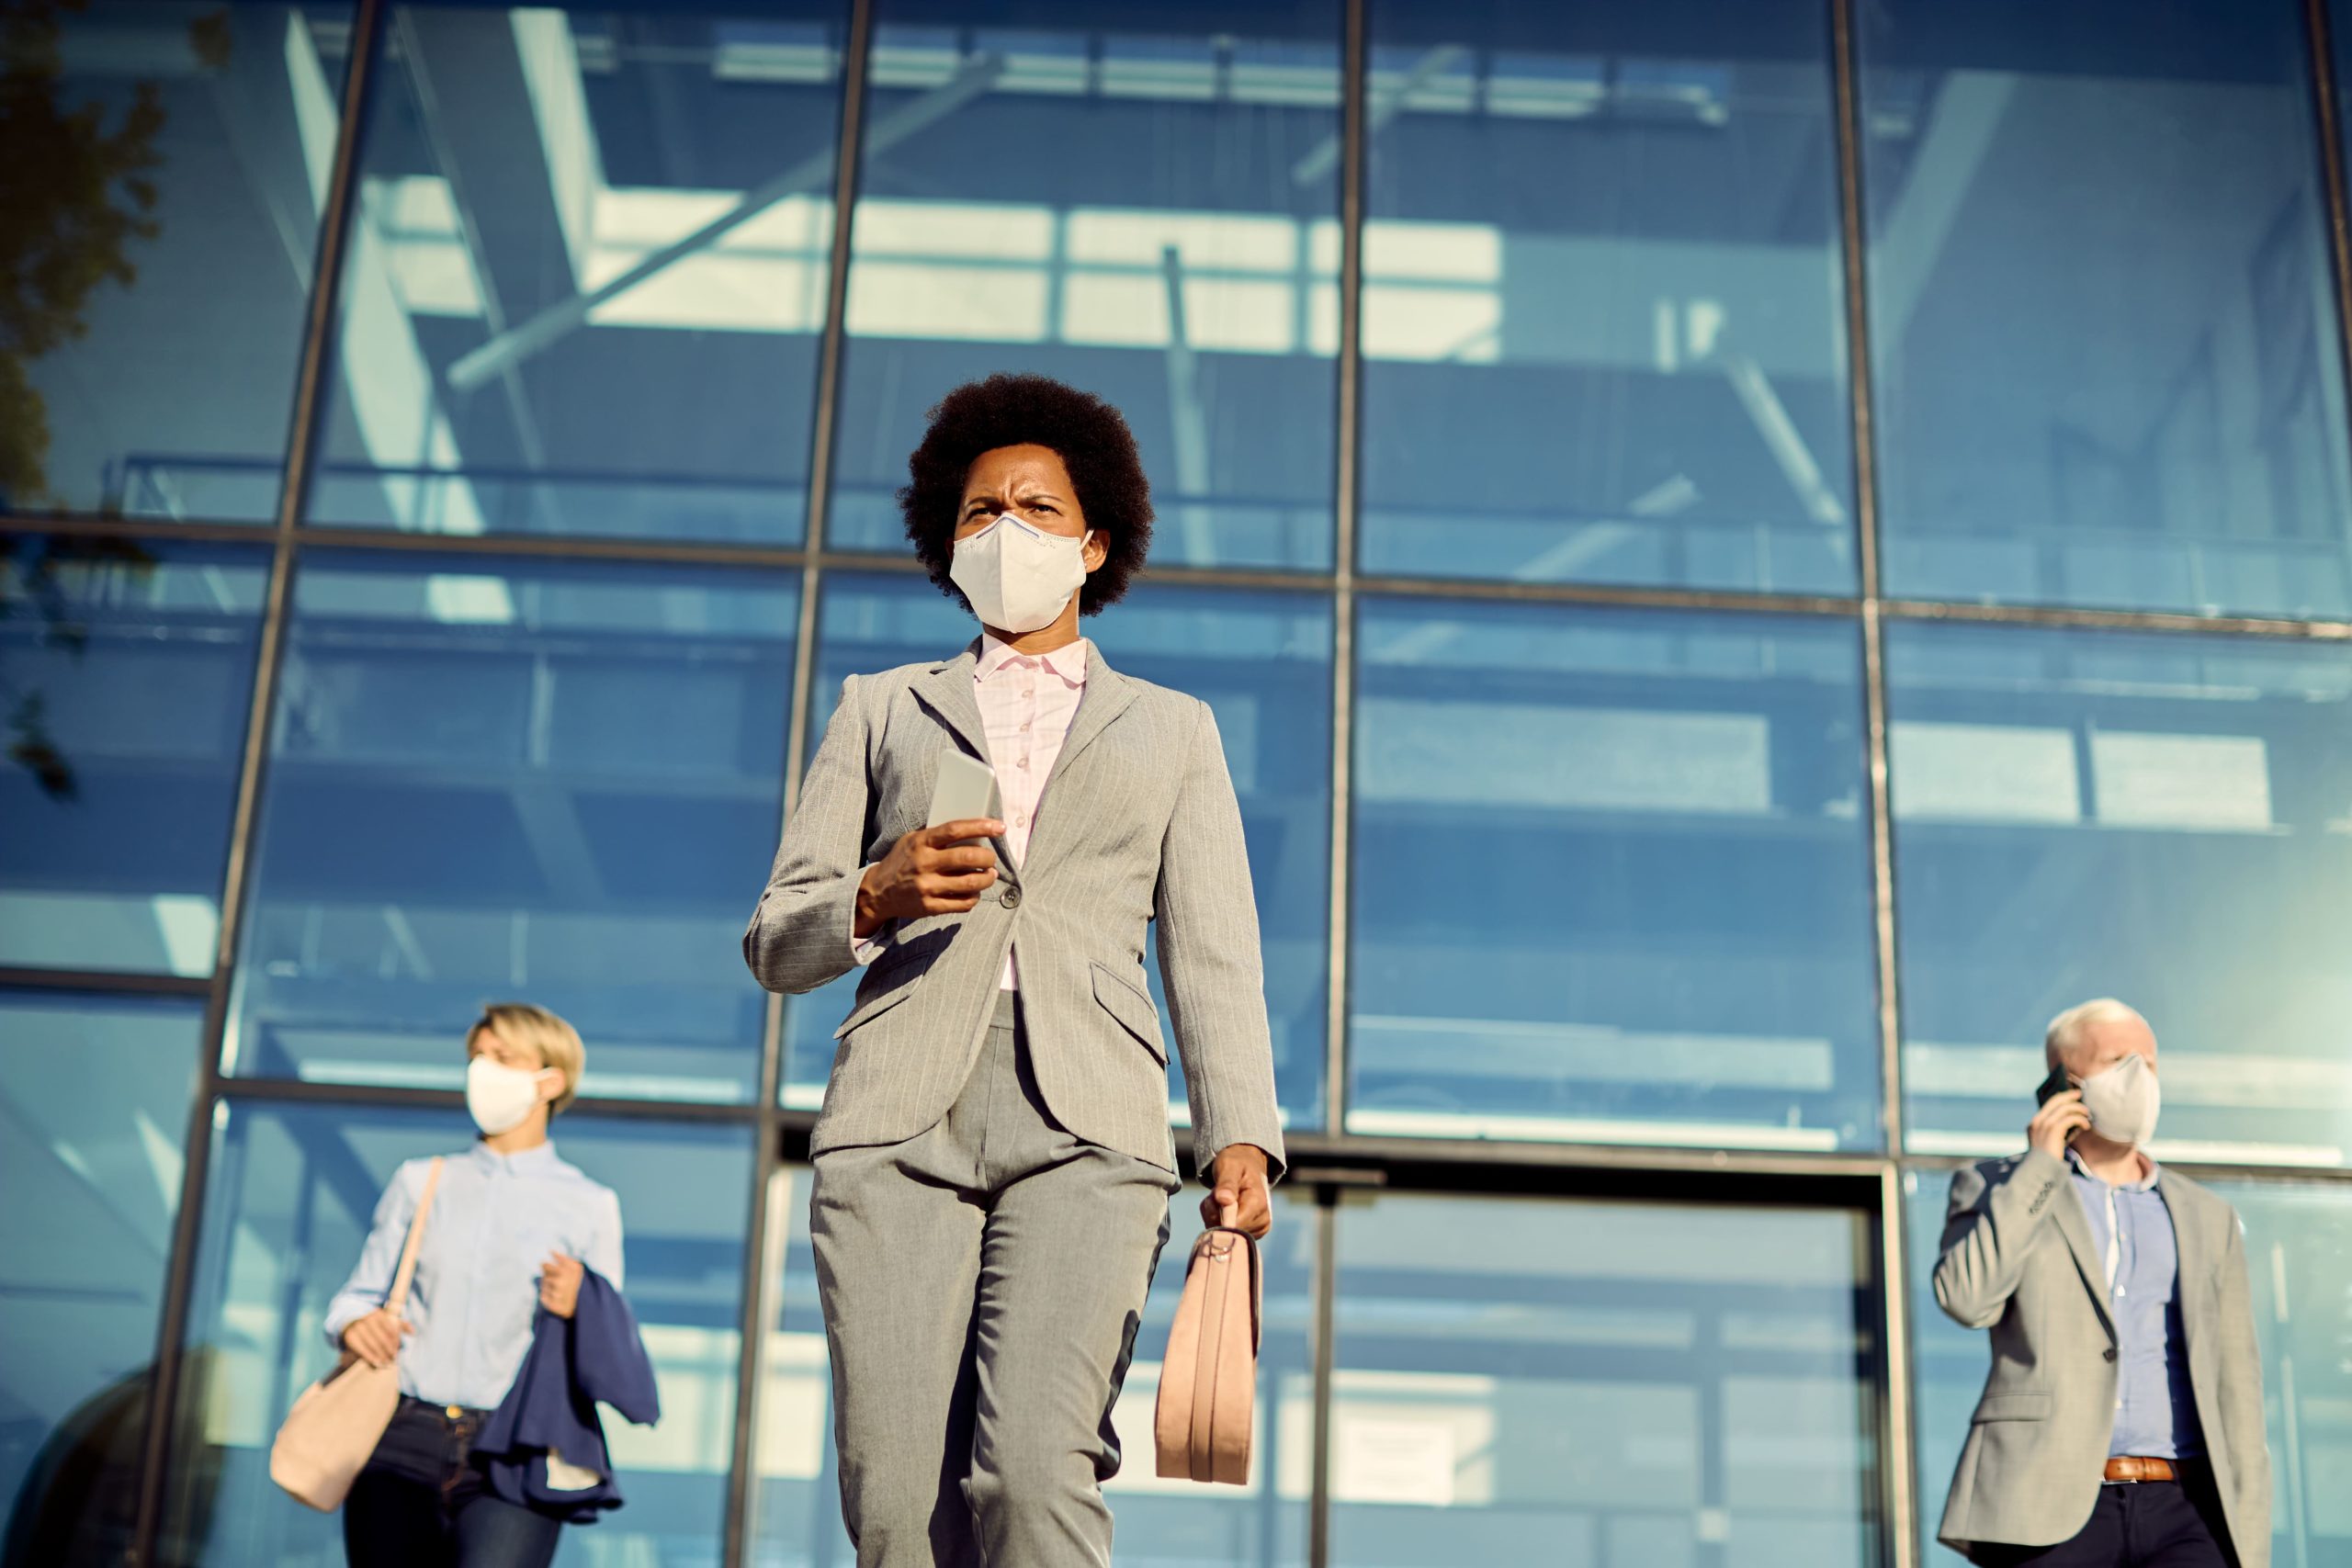 Return to work during the pandemic: what are the most important precautions?